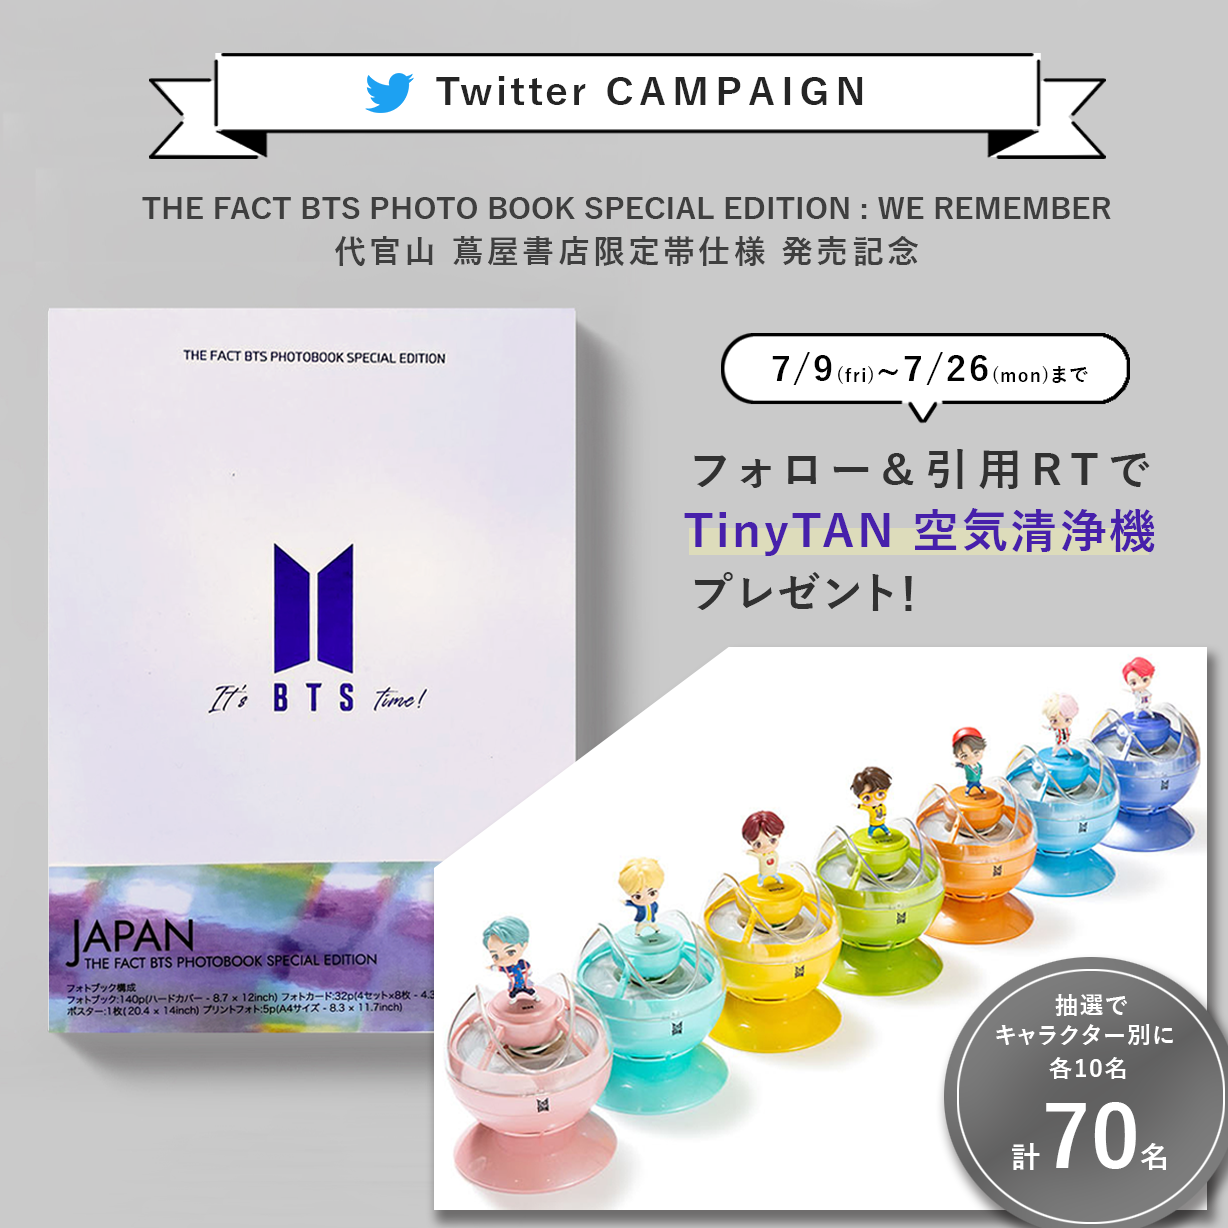 Twitterキャンペーン The Fact Bts Photo Book Special Edition We Remember発売記念snsキャンペーン イベント 代官山 T Site 蔦屋書店を中核とした生活提案型商業施設